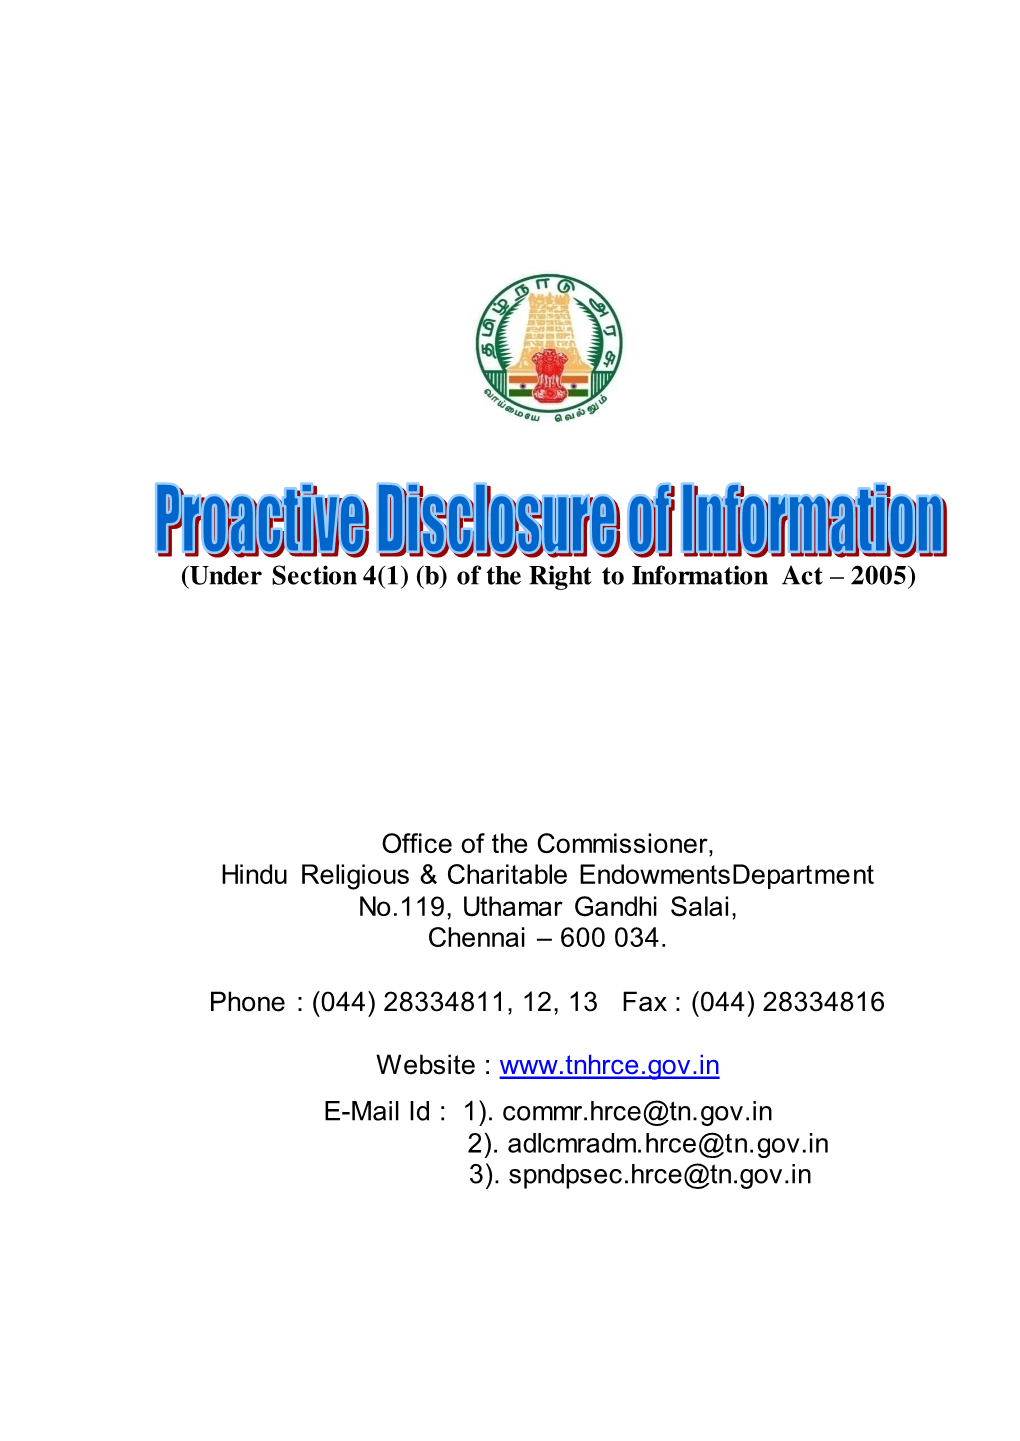 (Under Section 4(1) (B) of the Right to Information Act – 2005) Office of The